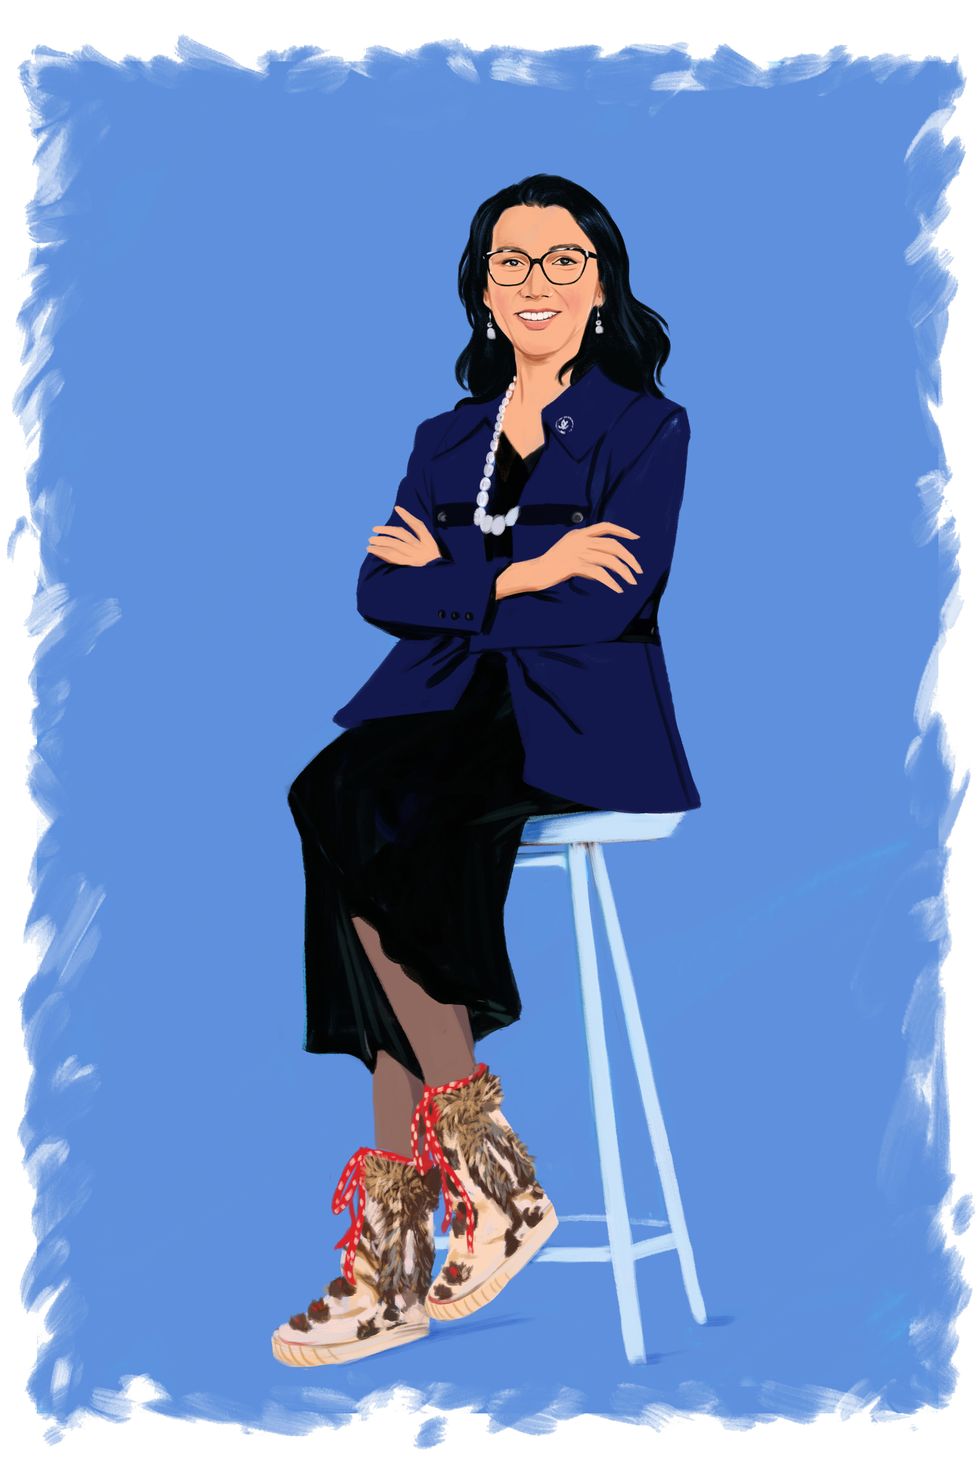 an illustration of mary peltola sitting on a stool in the outfit she wore when she was sworn into congress, a blue suit and traditional footwear